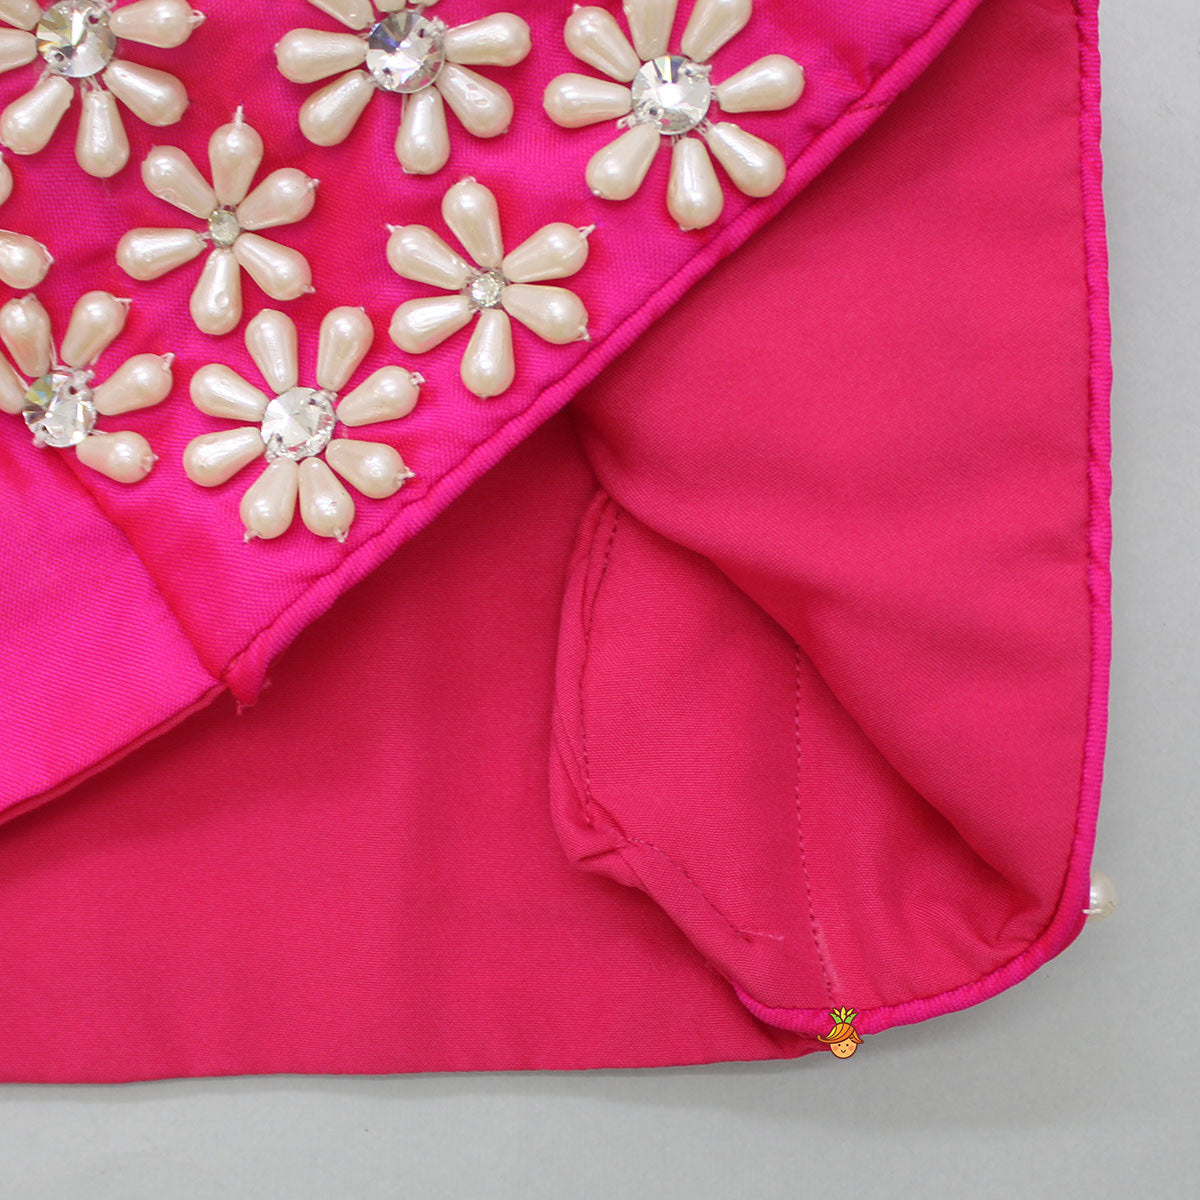 Halter Neck Pink Floral Embroidered Top And Scalloped Hem Lehenga With Flat Back Pearls Enhanced Ruffle Dupatta